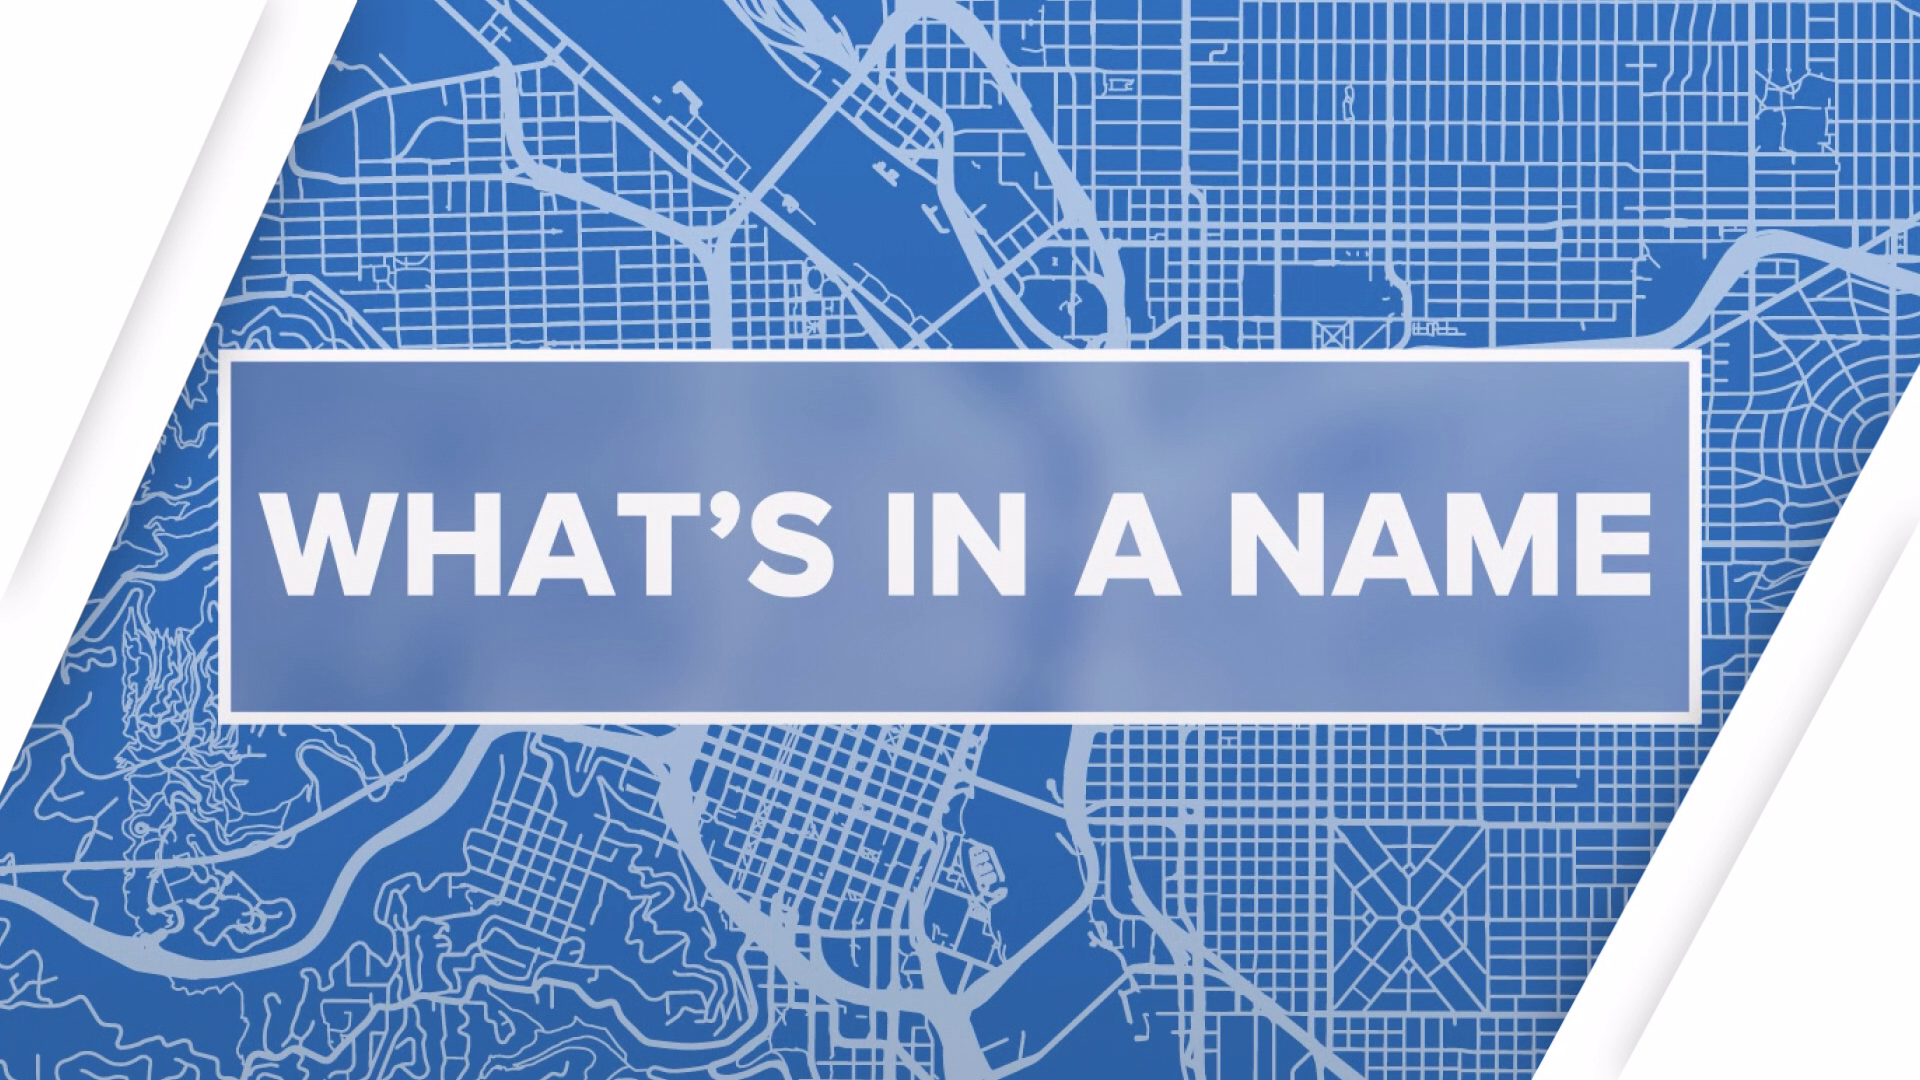 The (often fun, quirky or humorous) history of how places in the Northwest got their name